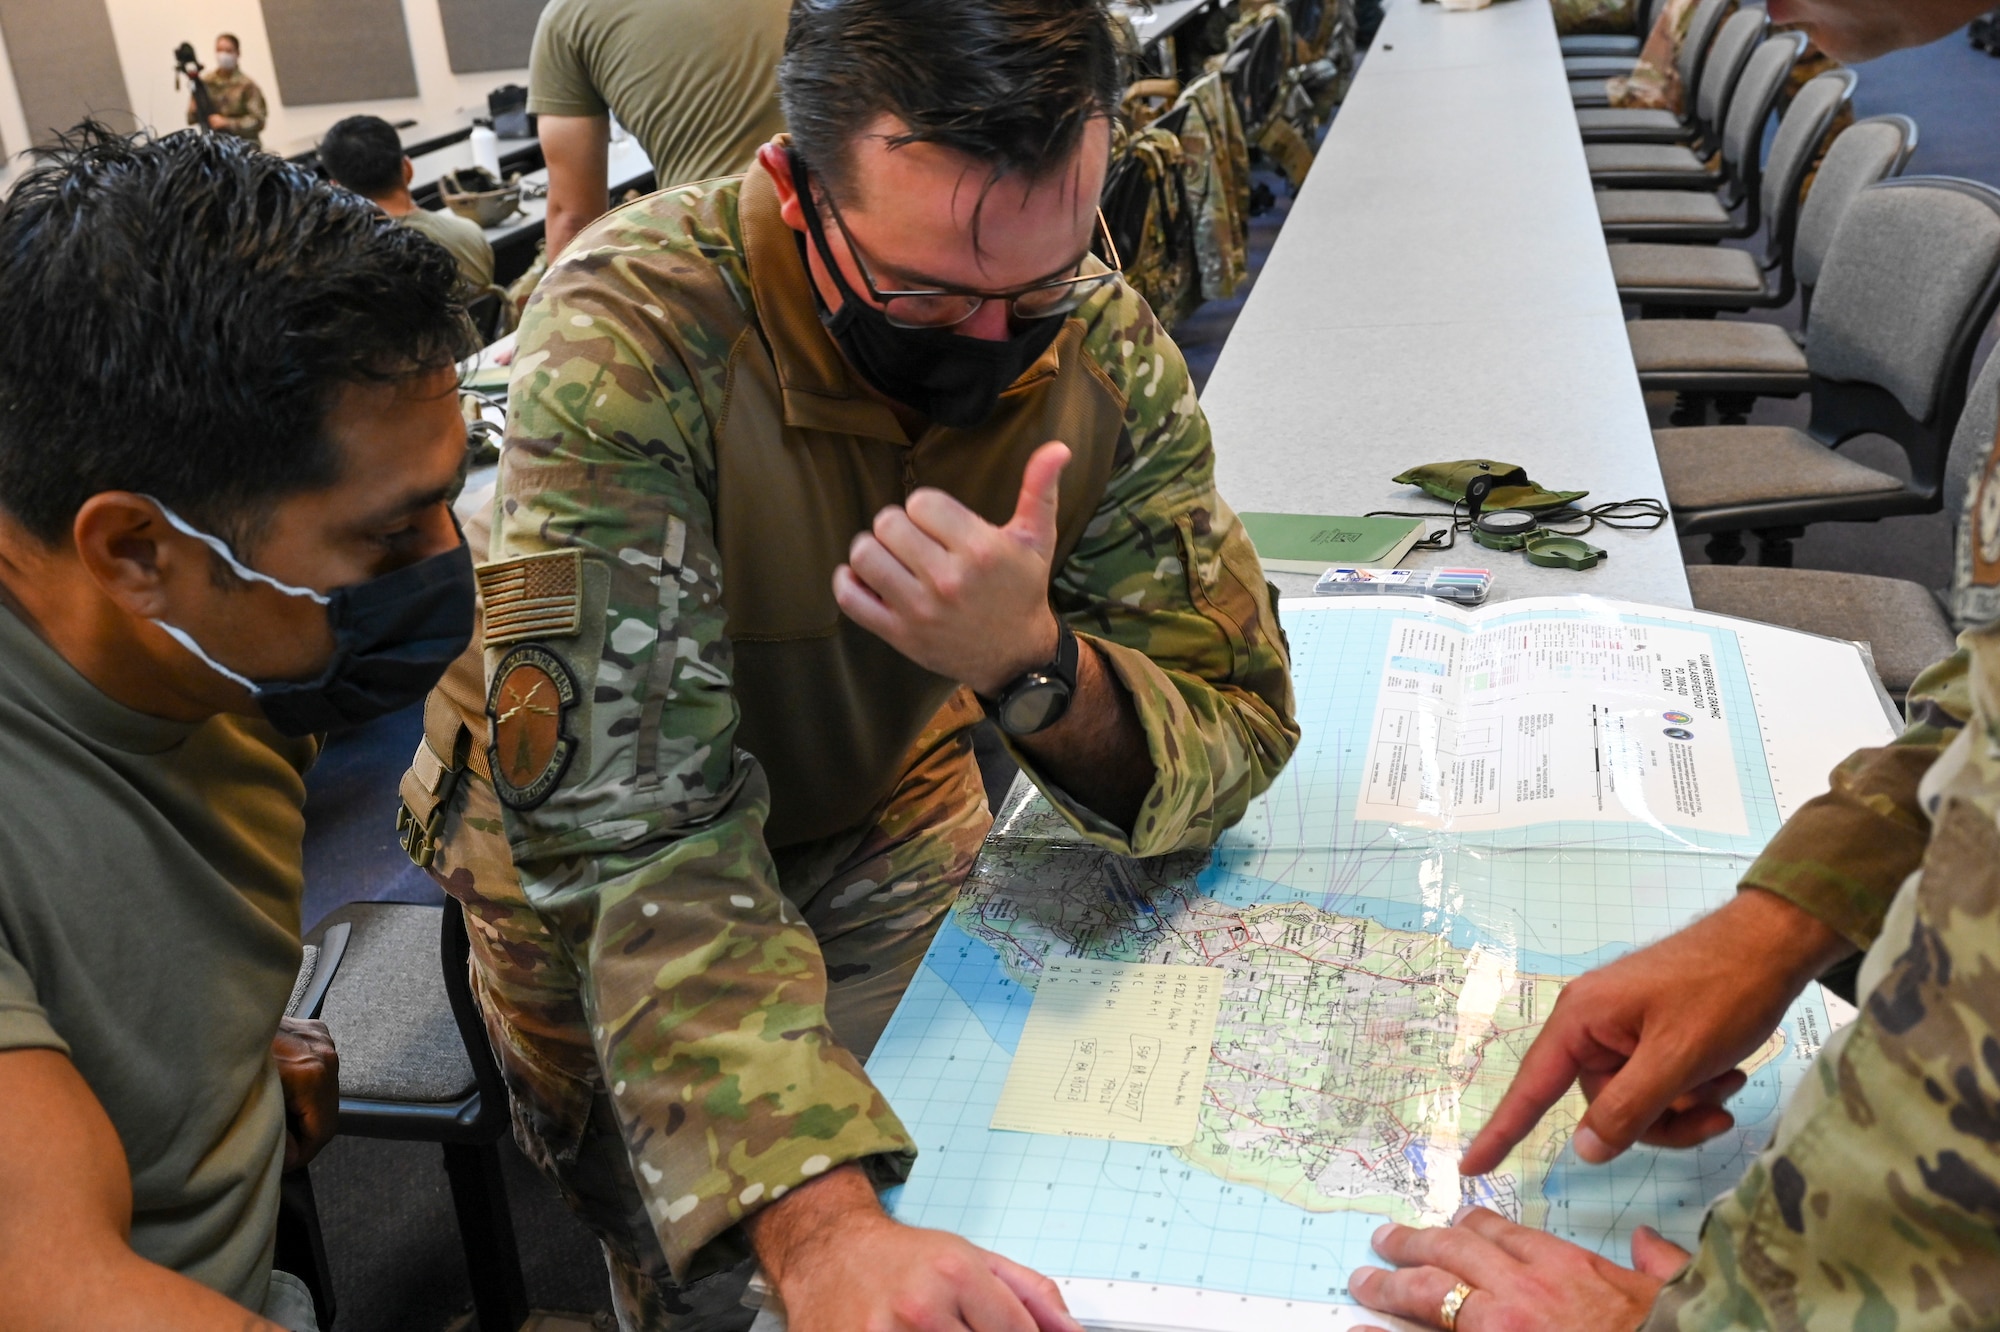 A student from the 644th Combat Communications Squadron gives a thumps up after successfully plotting coordinates using a map during their classroom portion of training on North West Field, Guam, April 9, 2021. Students took part in exercise Dragon Forge a combat skills training course that prepares participants to deploy to austere locations. (U.S. Air Force photo by Tech. Sgt. Esteban Esquivel)